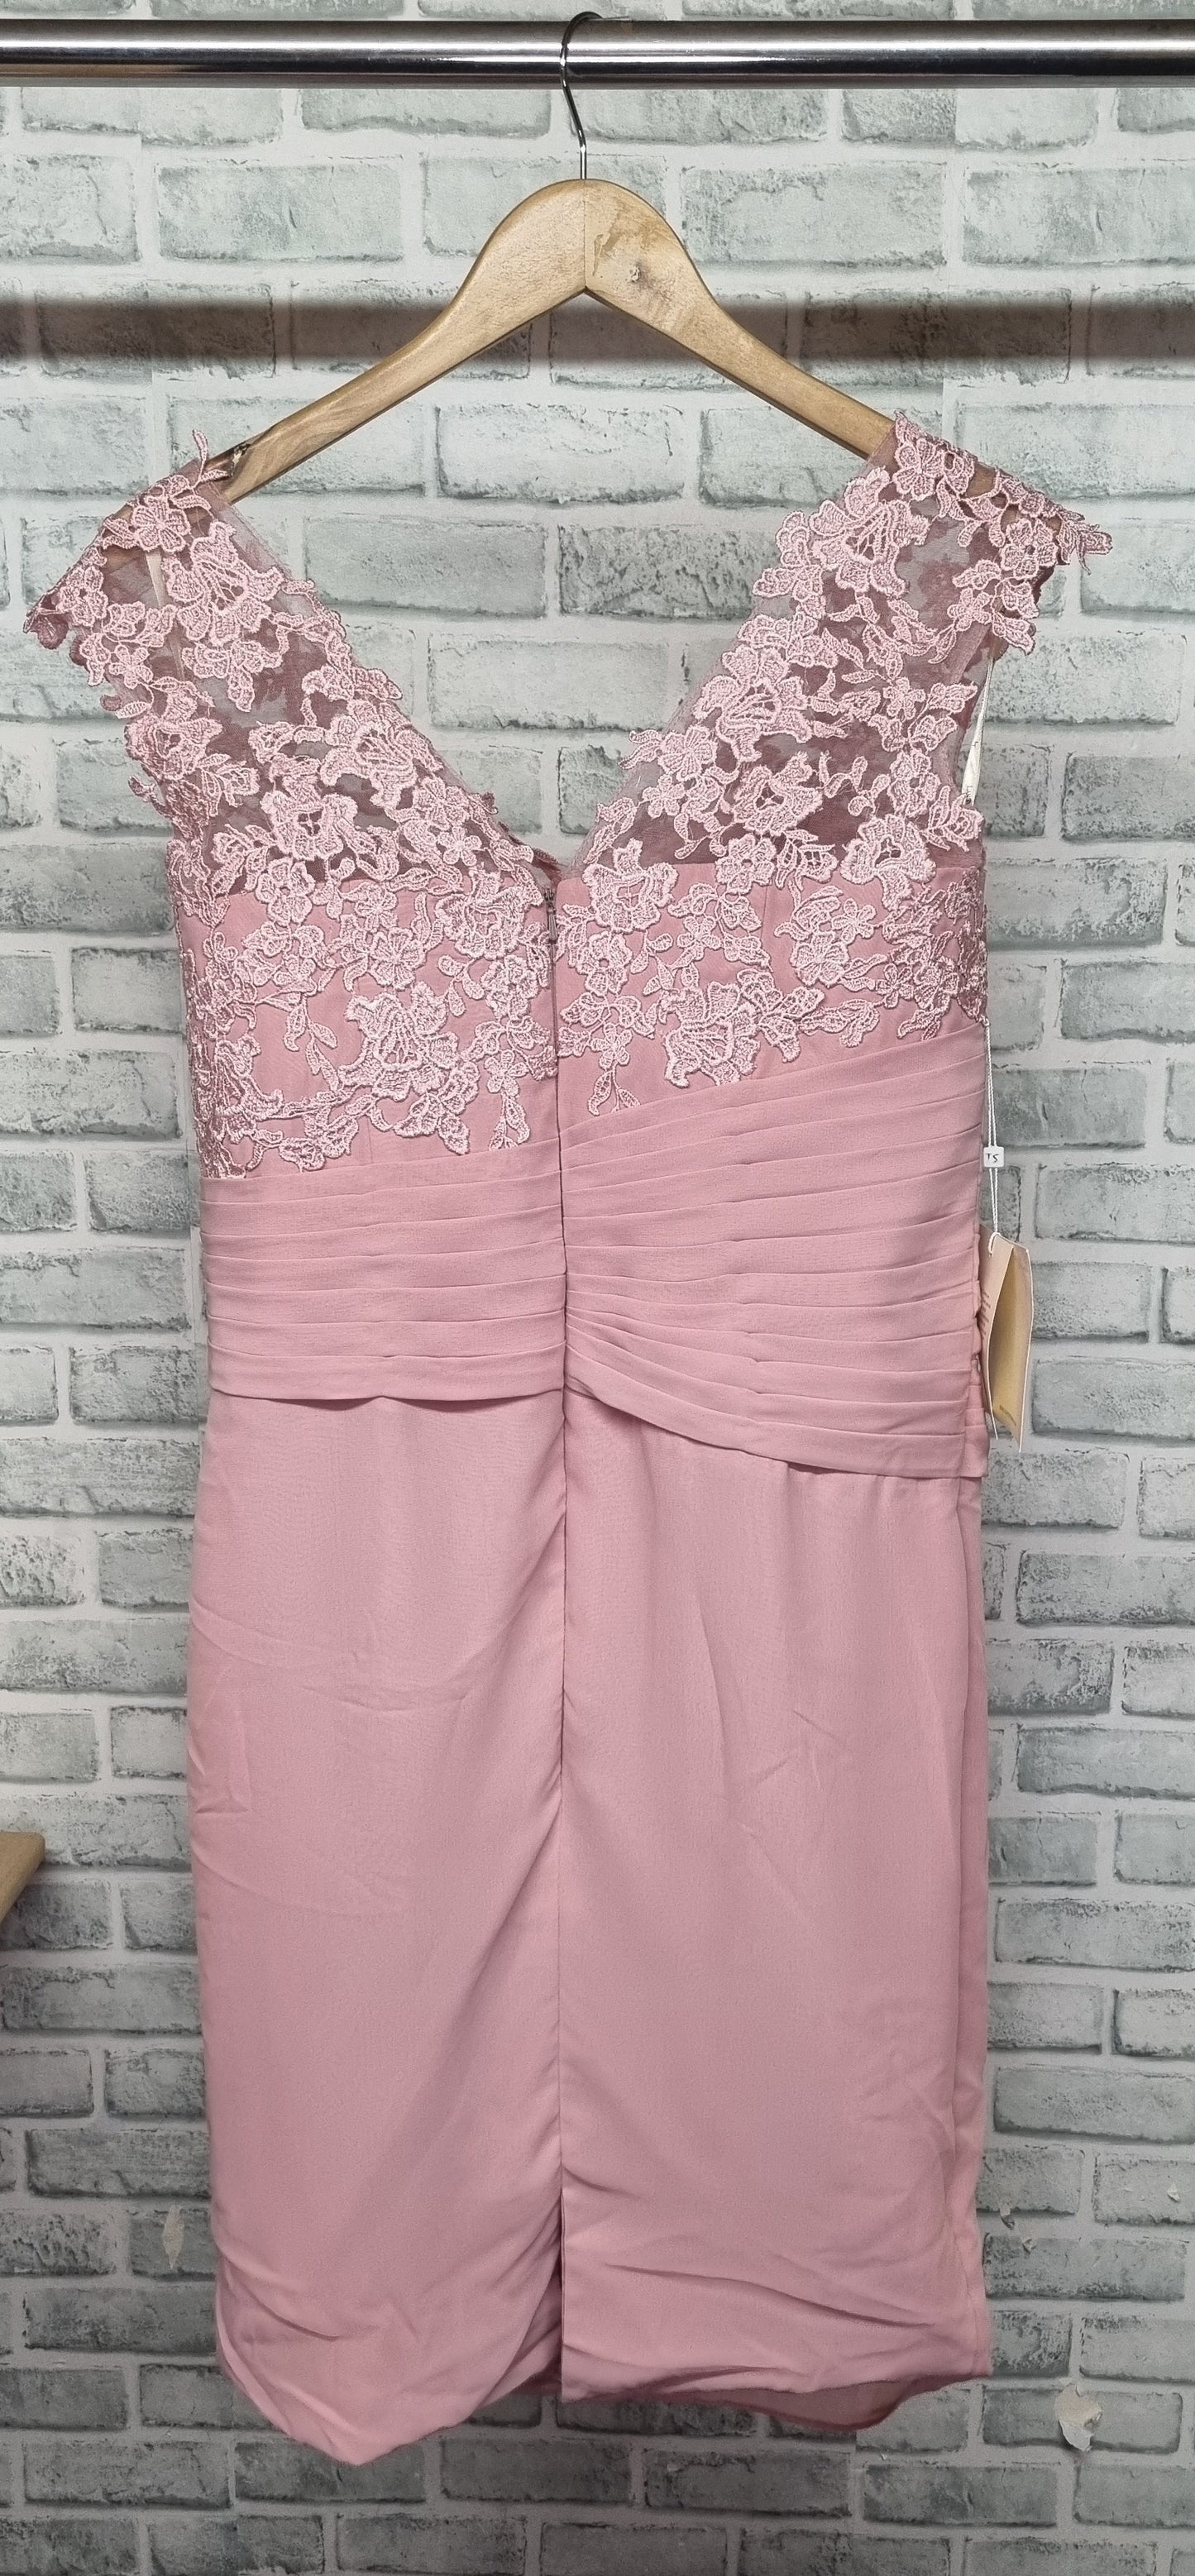 LanTing Bride Pink Mini Embroidered Lace Bridesmaid Prom Dress Size Large BNWT